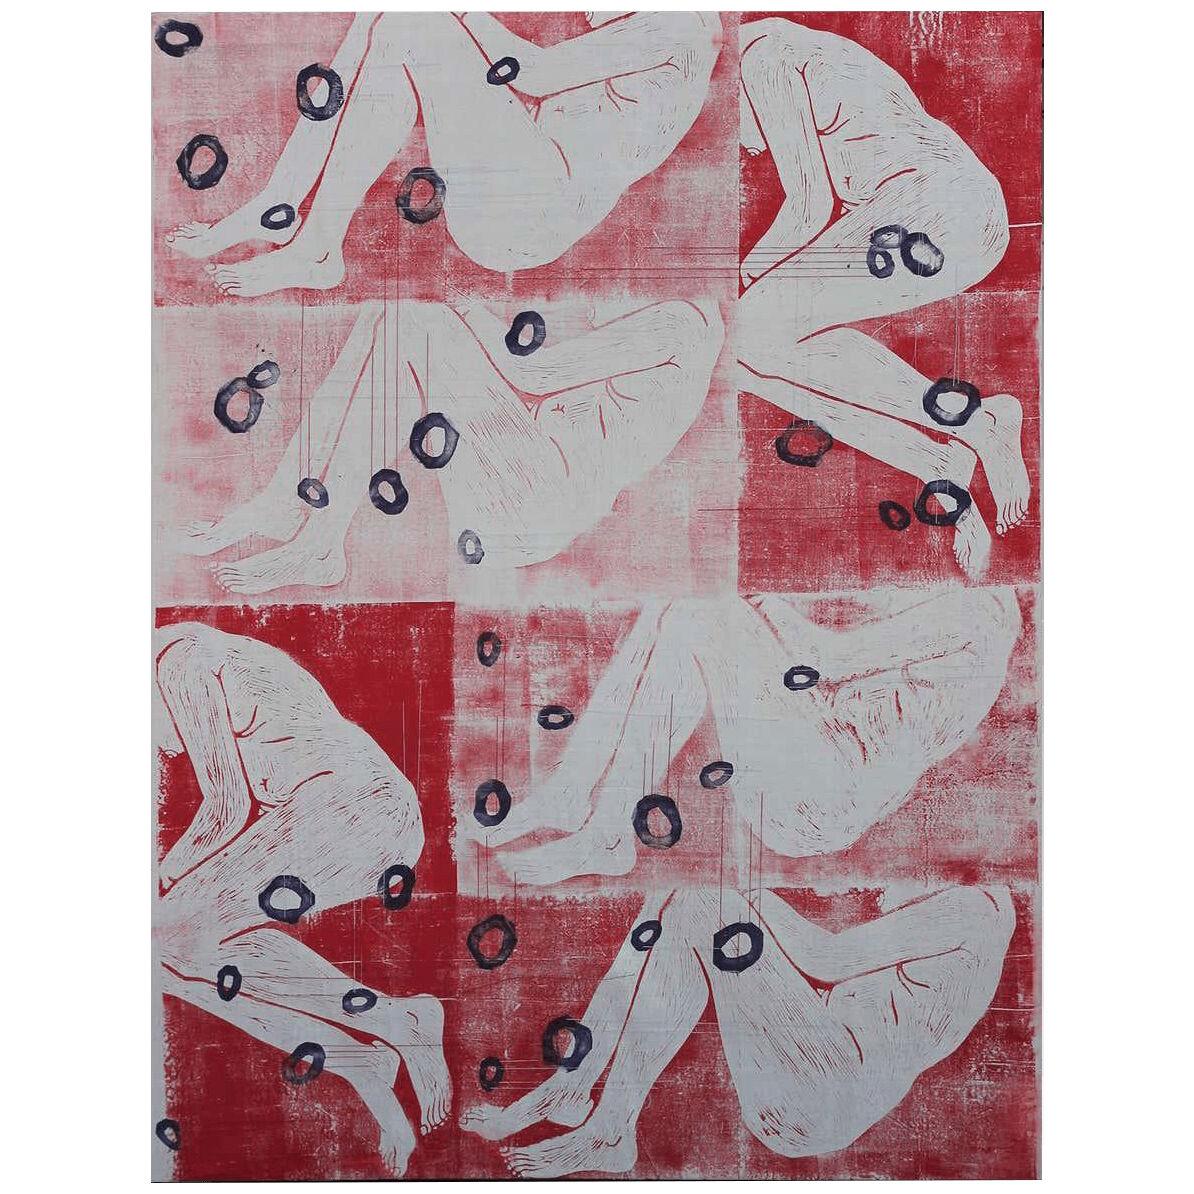 Contemporary Abstract Red and White Mixed-Media Canvas Print by Rebecca Nall